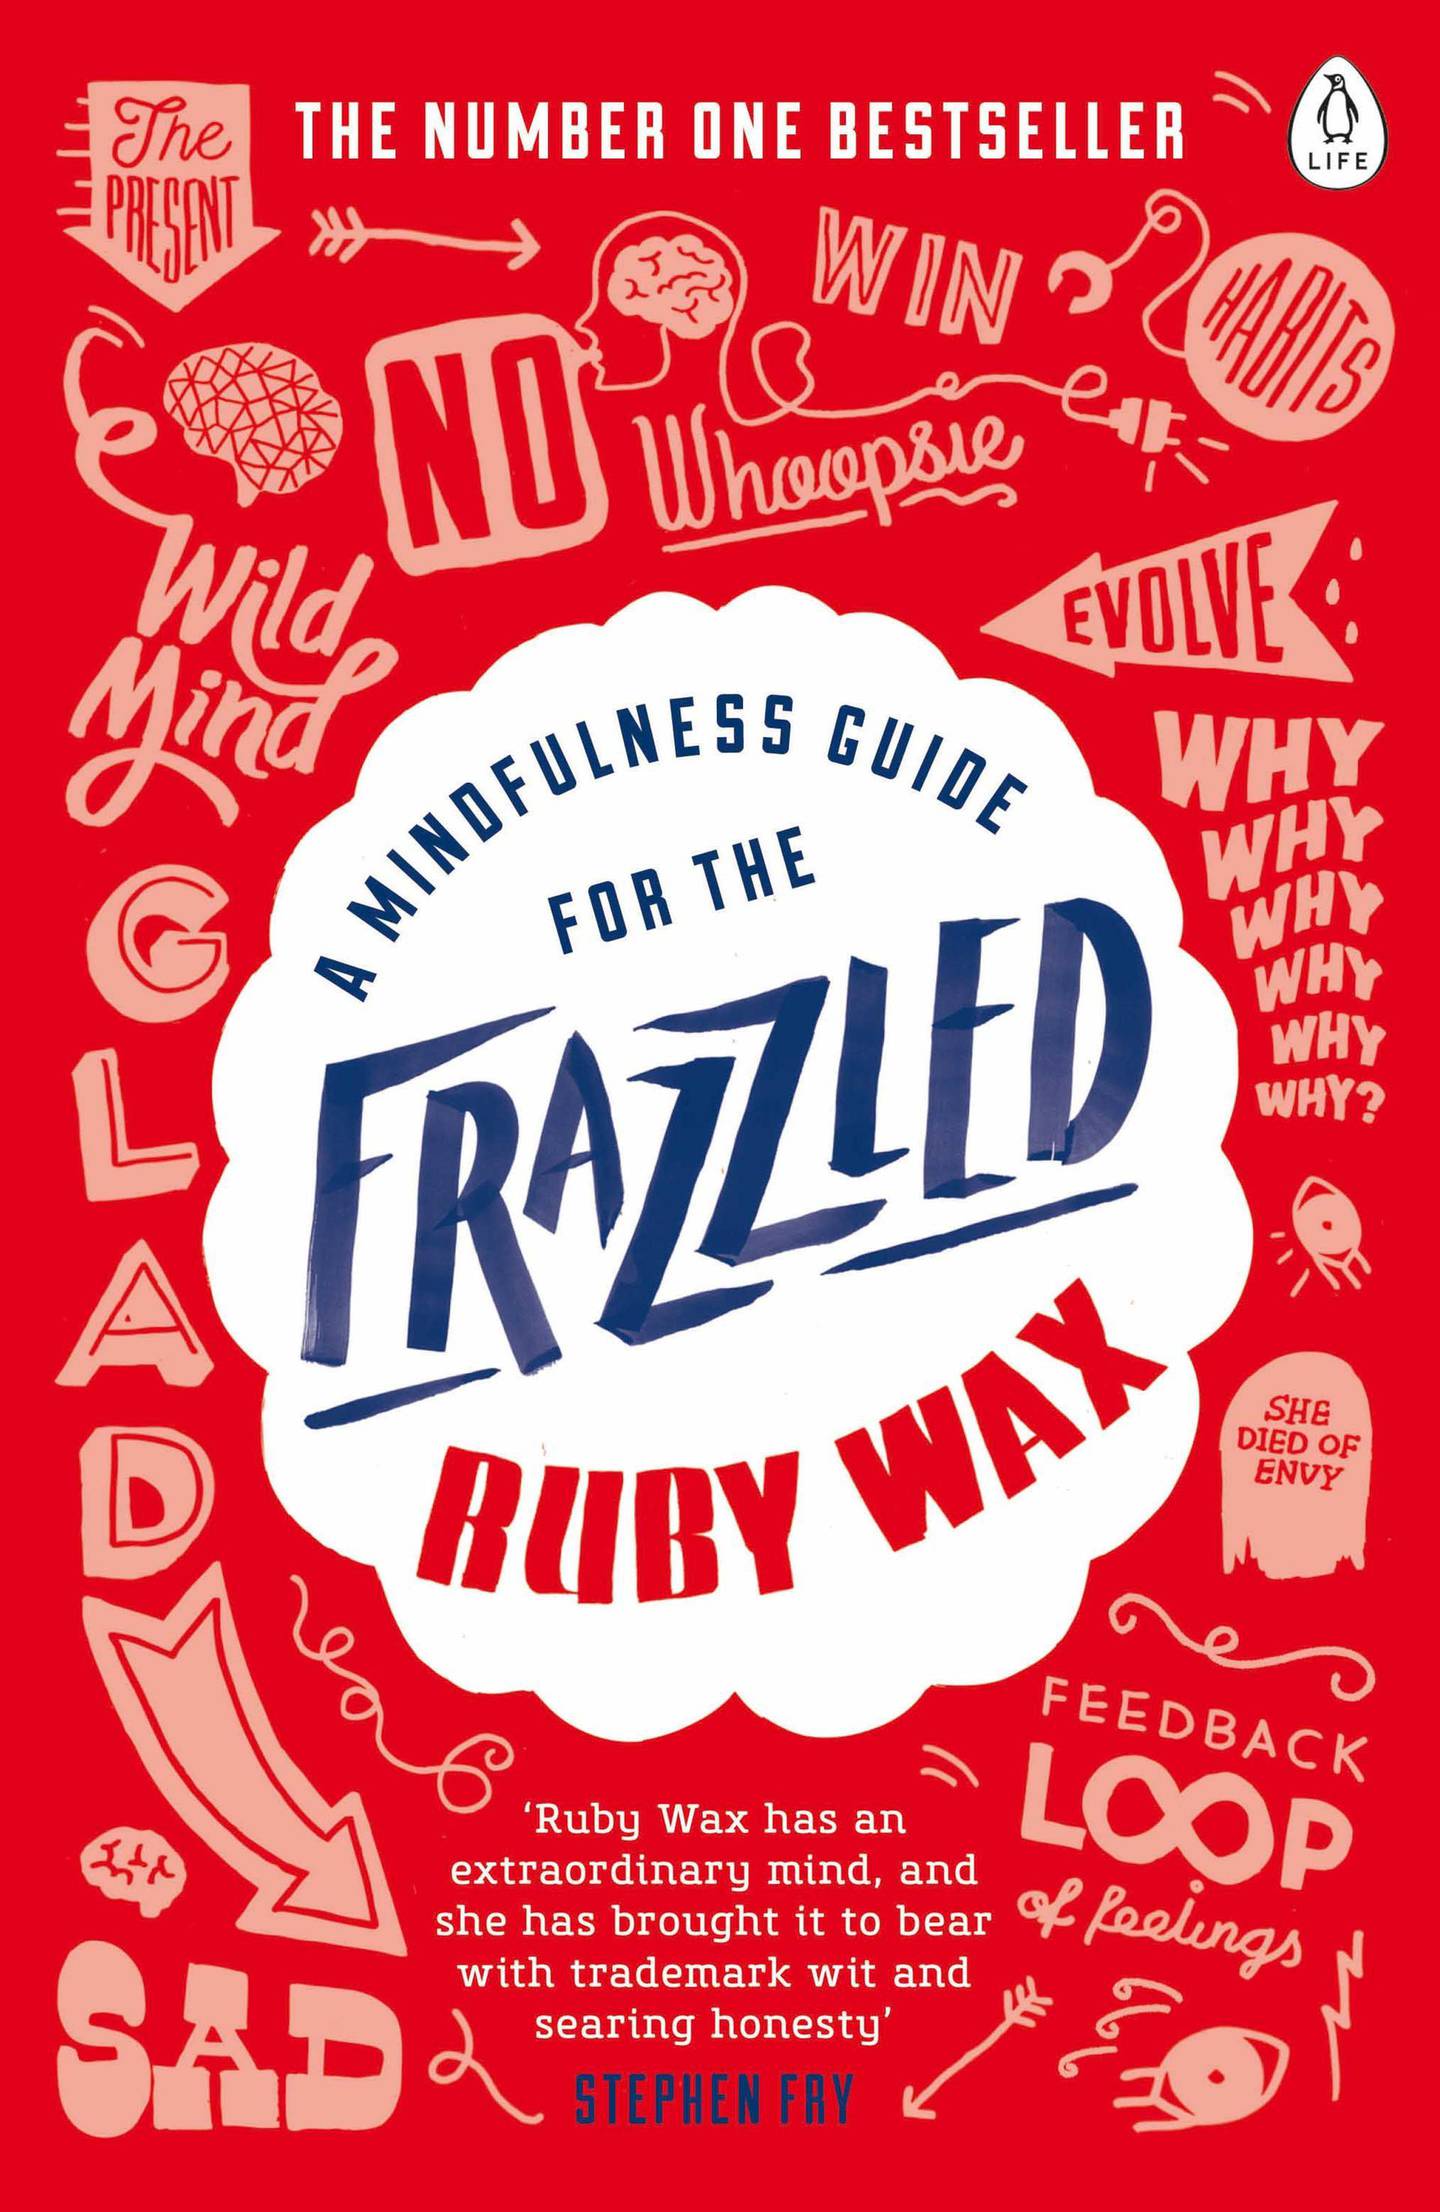 A Mindfulness Guide for the Frazzled by Ruby Wax published by Penguin Life. Courtesy Penguin UK